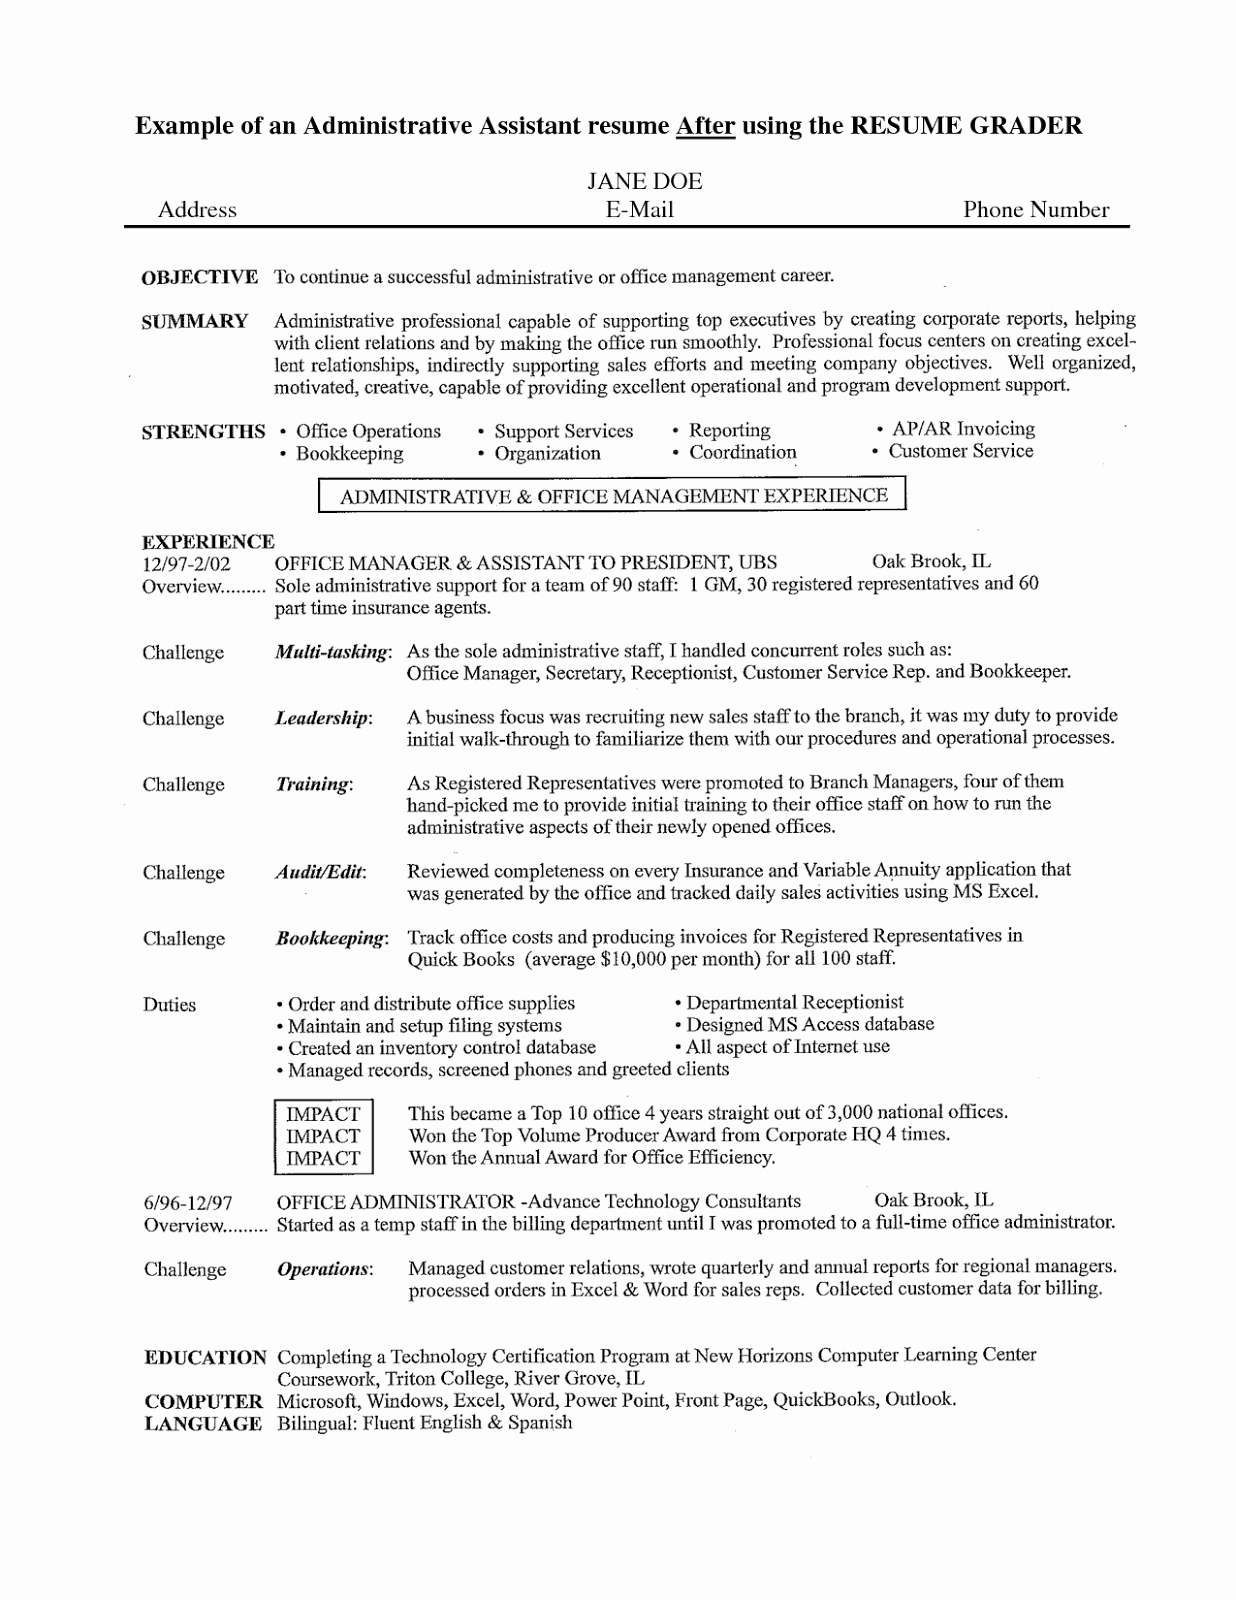 Administrative assistant Resume Objective Elegant Administrative assistant Summary for Resume Resume Ideas